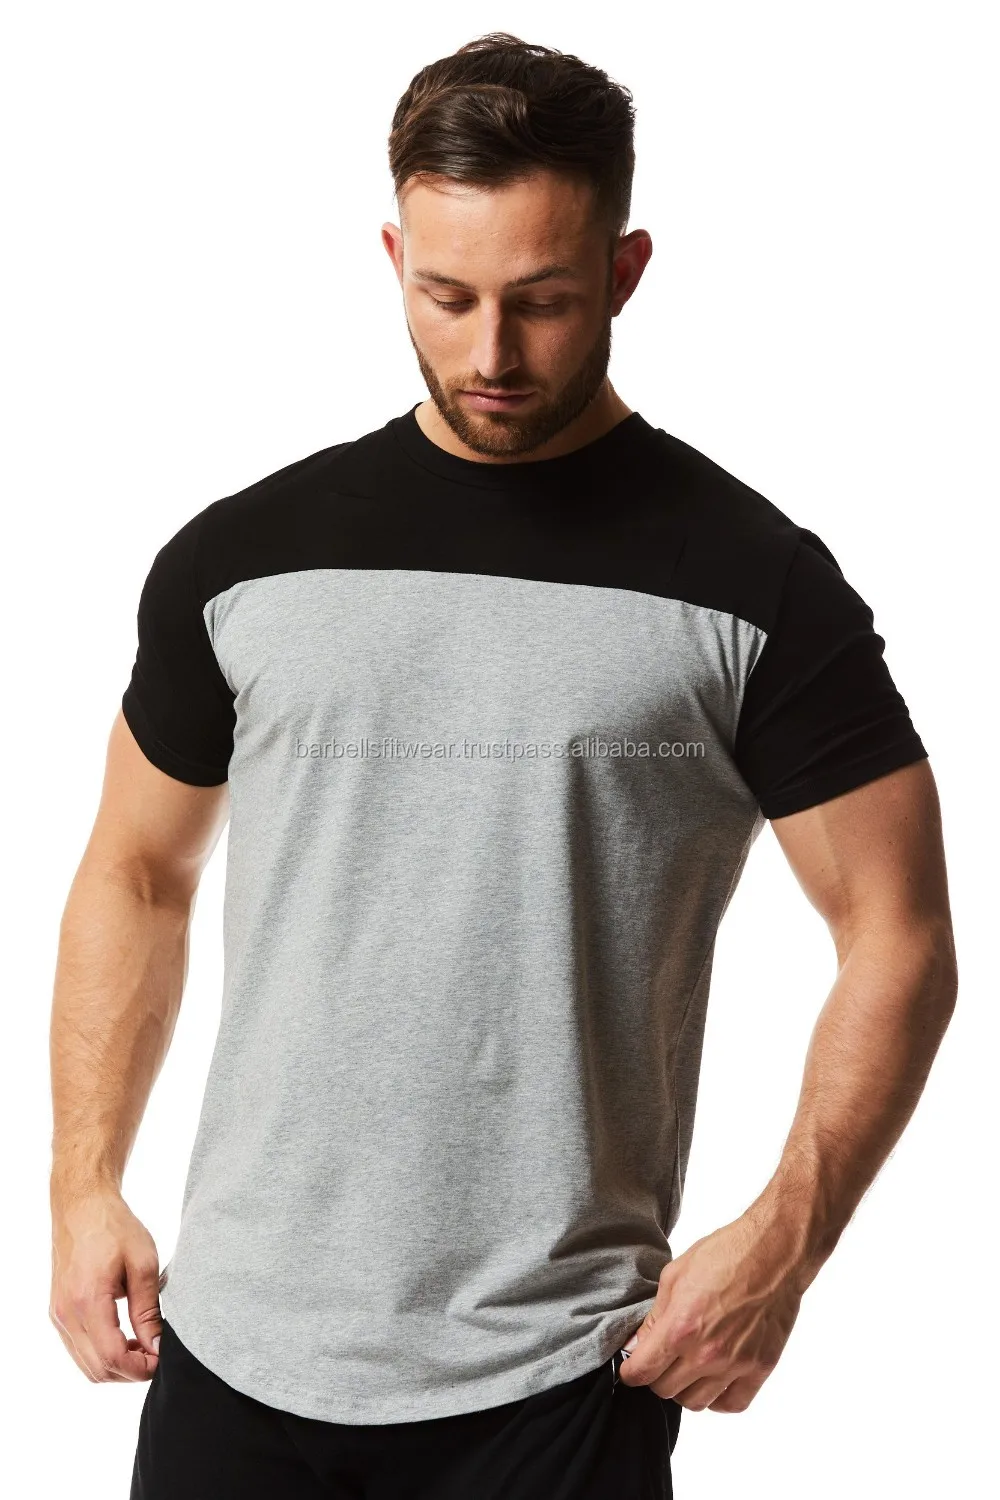 Men Fitted Stretchable Cotton T Shirt - Buy Fitted T Shirt,Stretchable ...